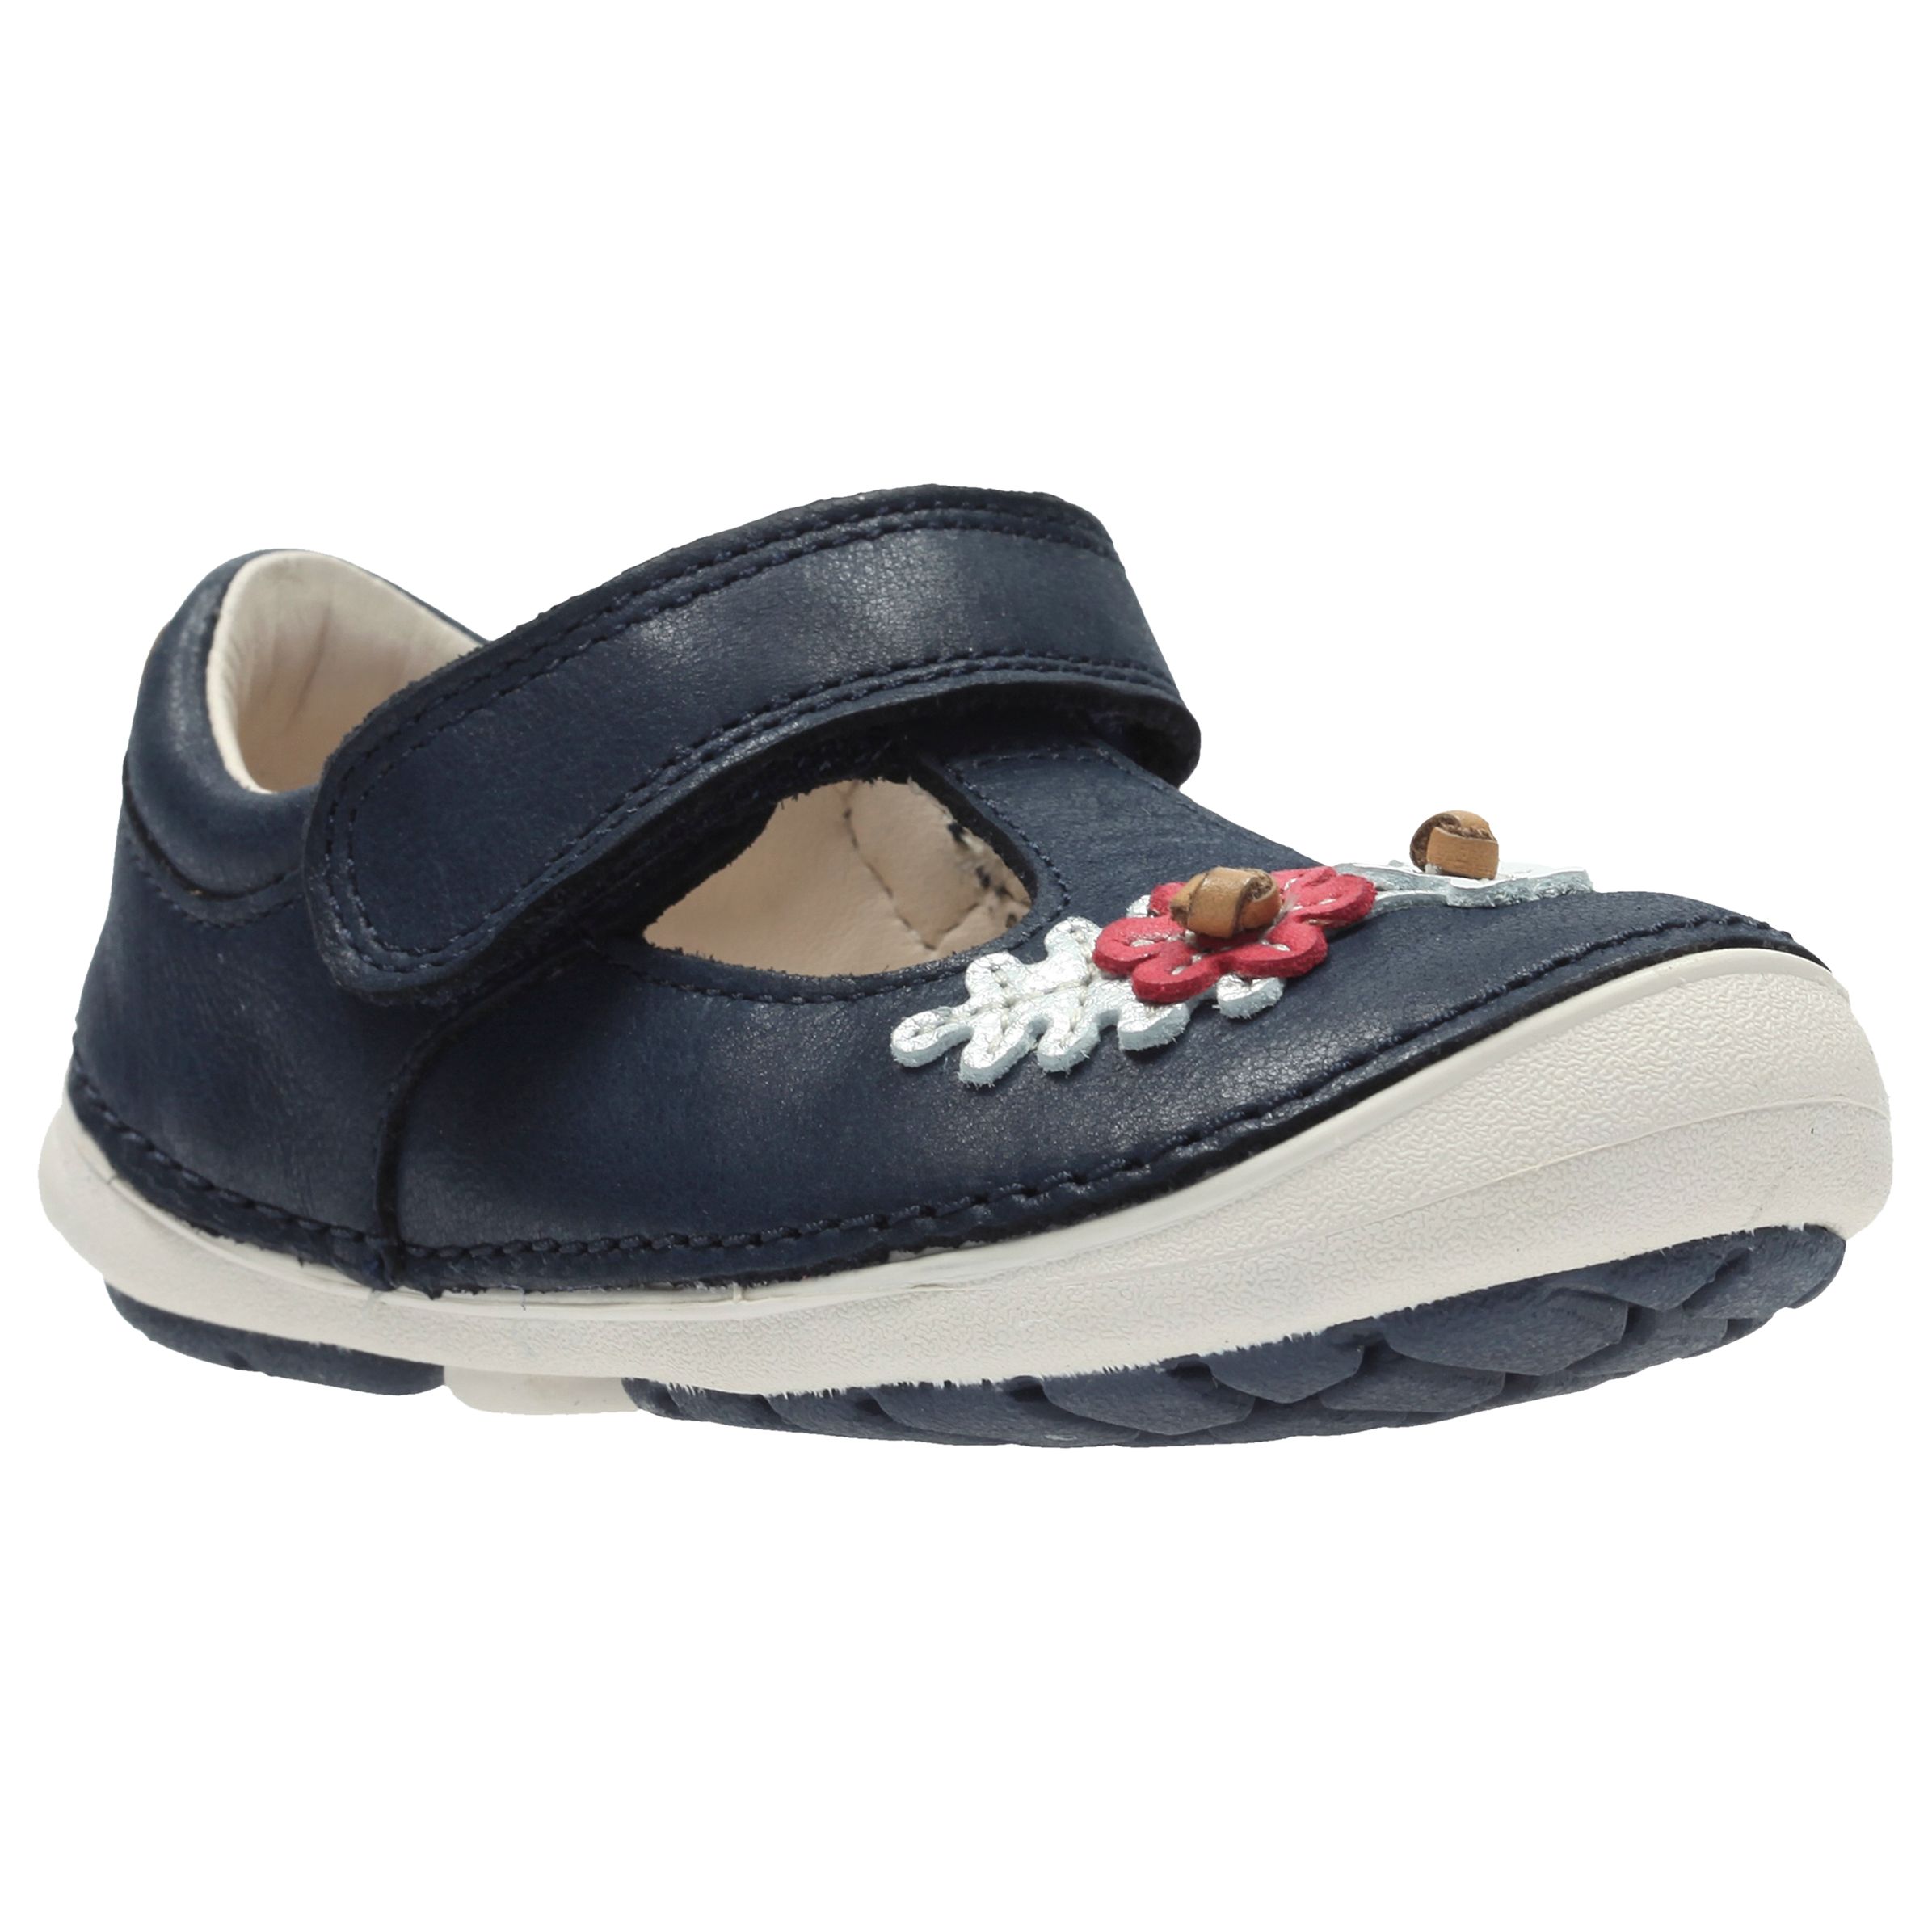 Clarks Children's Softly Blossom First Shoes, Blue